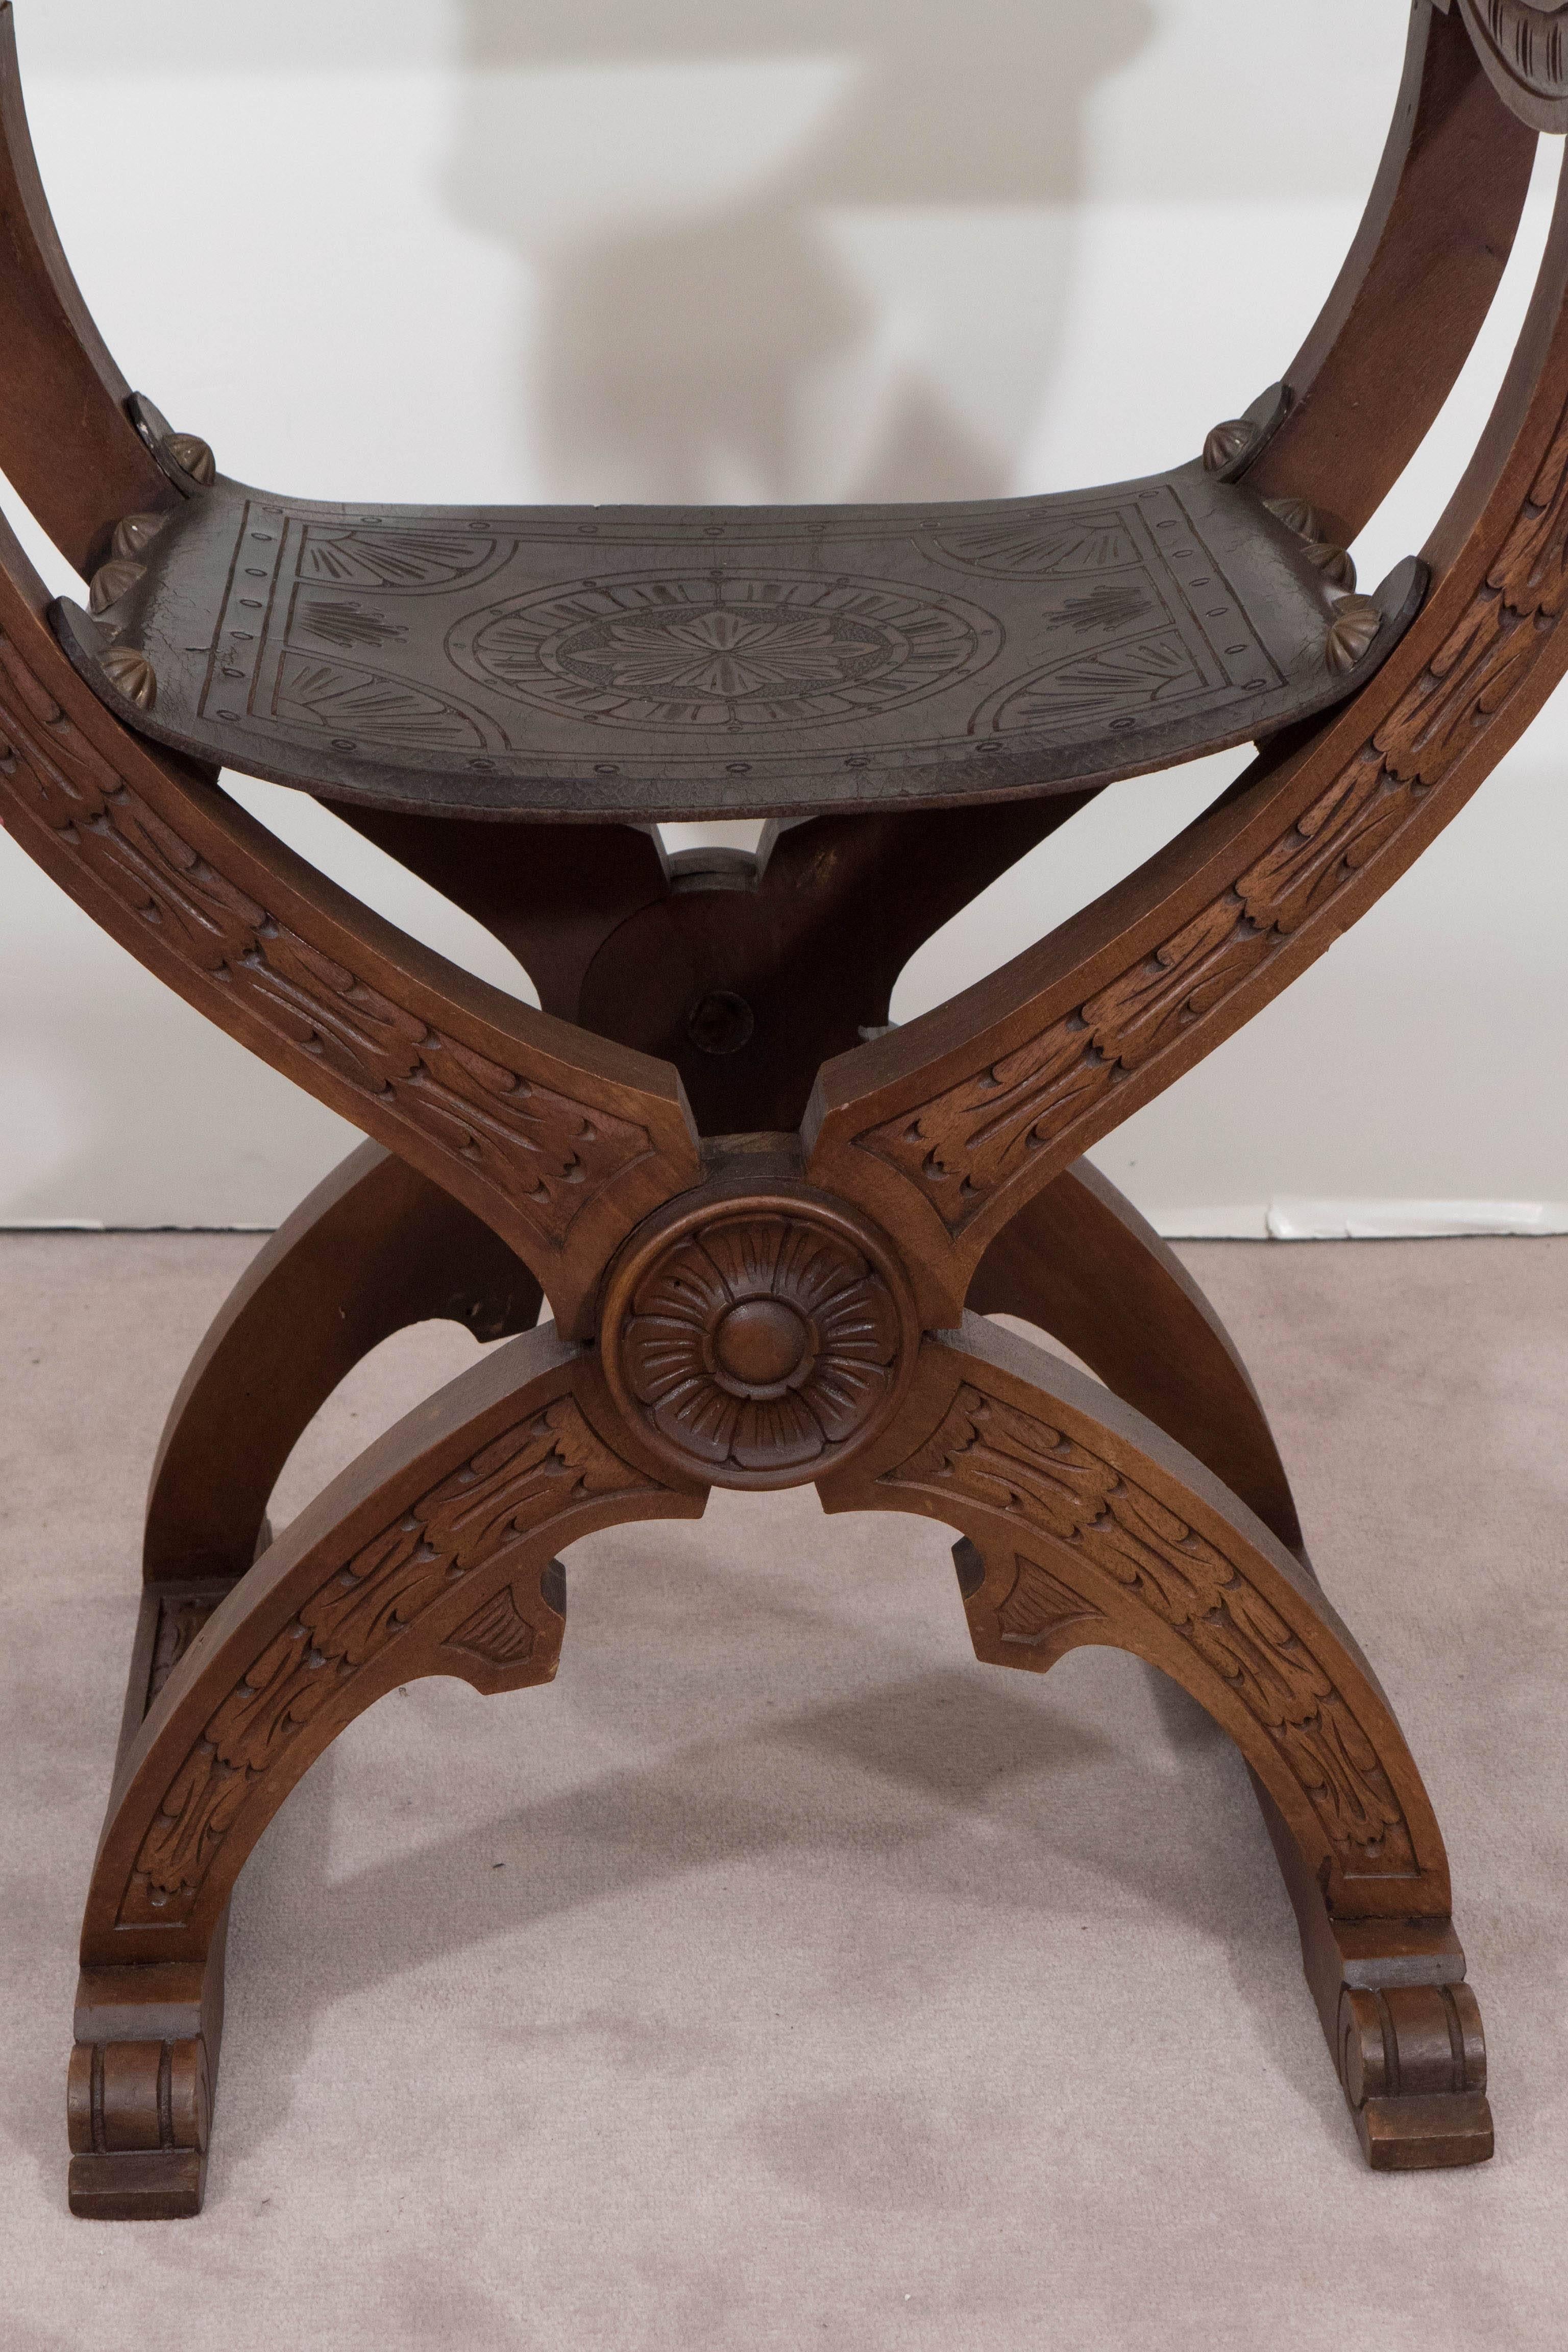 A vintage Savonarola chair, produced in Italy, circa 1950s, with beautifully detailed, etched leather seat and back, set by decorative brass nail heads against a foldable X-frame, in carved walnut with curved scroll arms. The chair remains in very